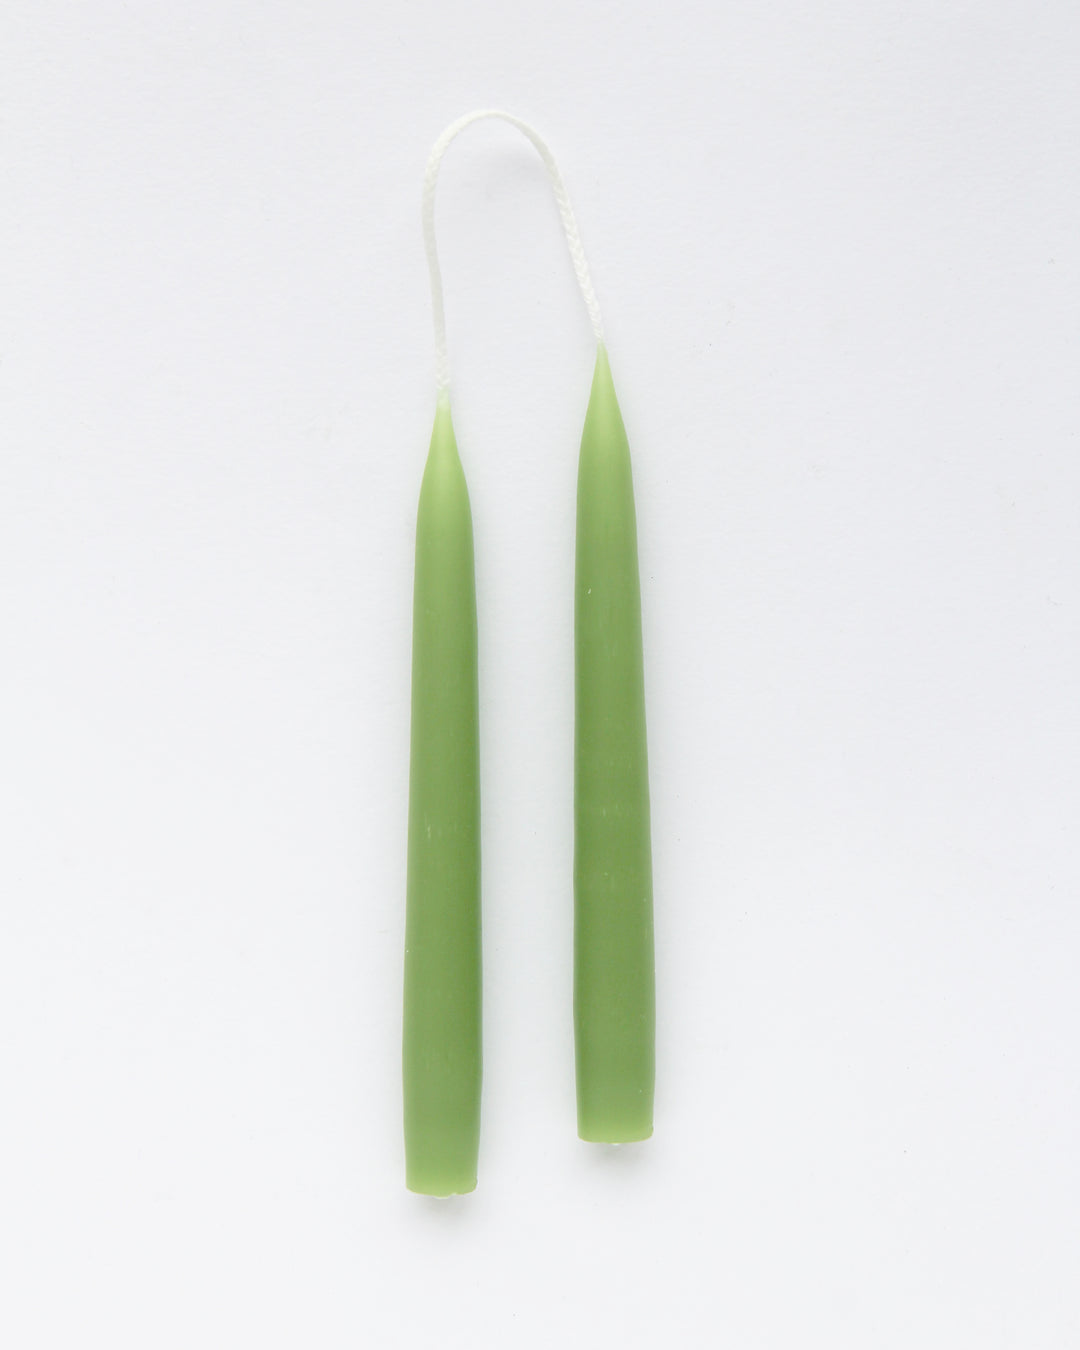 Small Pair of Candles / Green